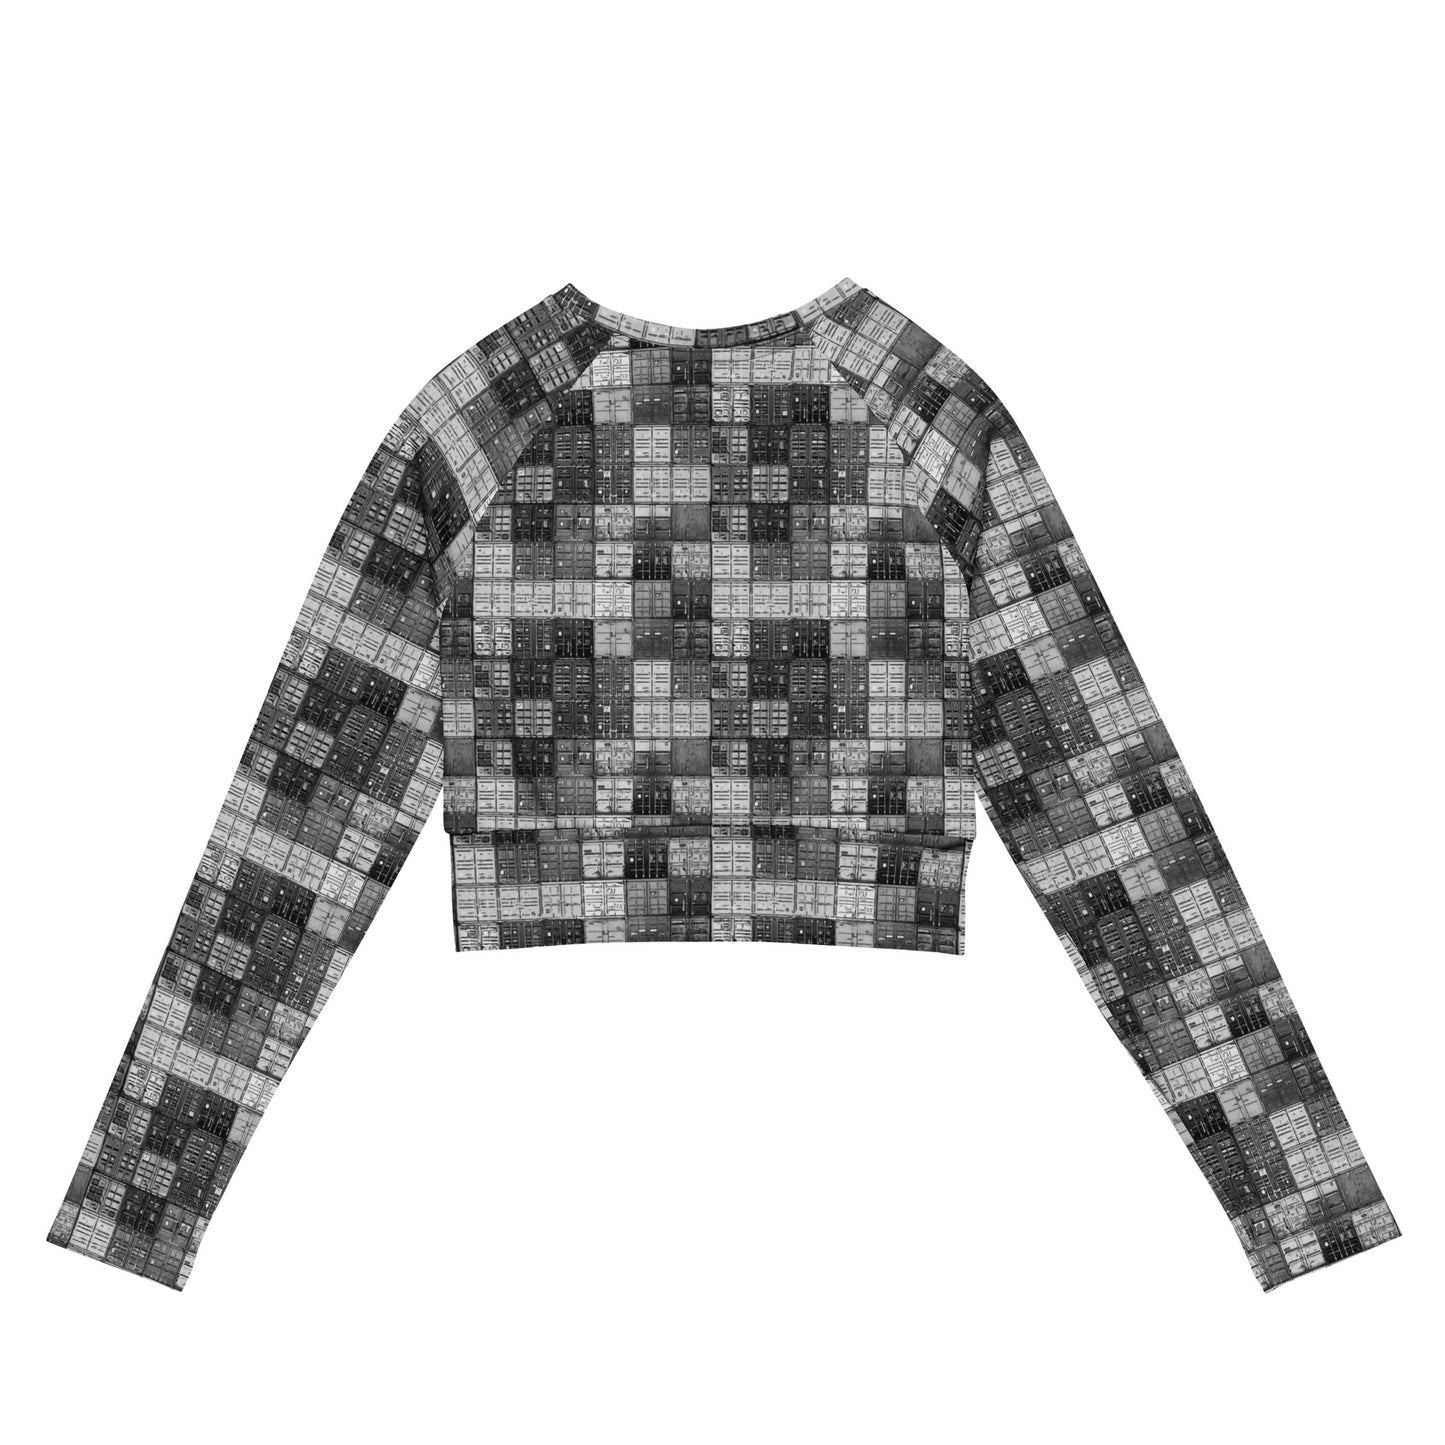 "Mono Shipping Containers"  Eco-friendly Crop Top